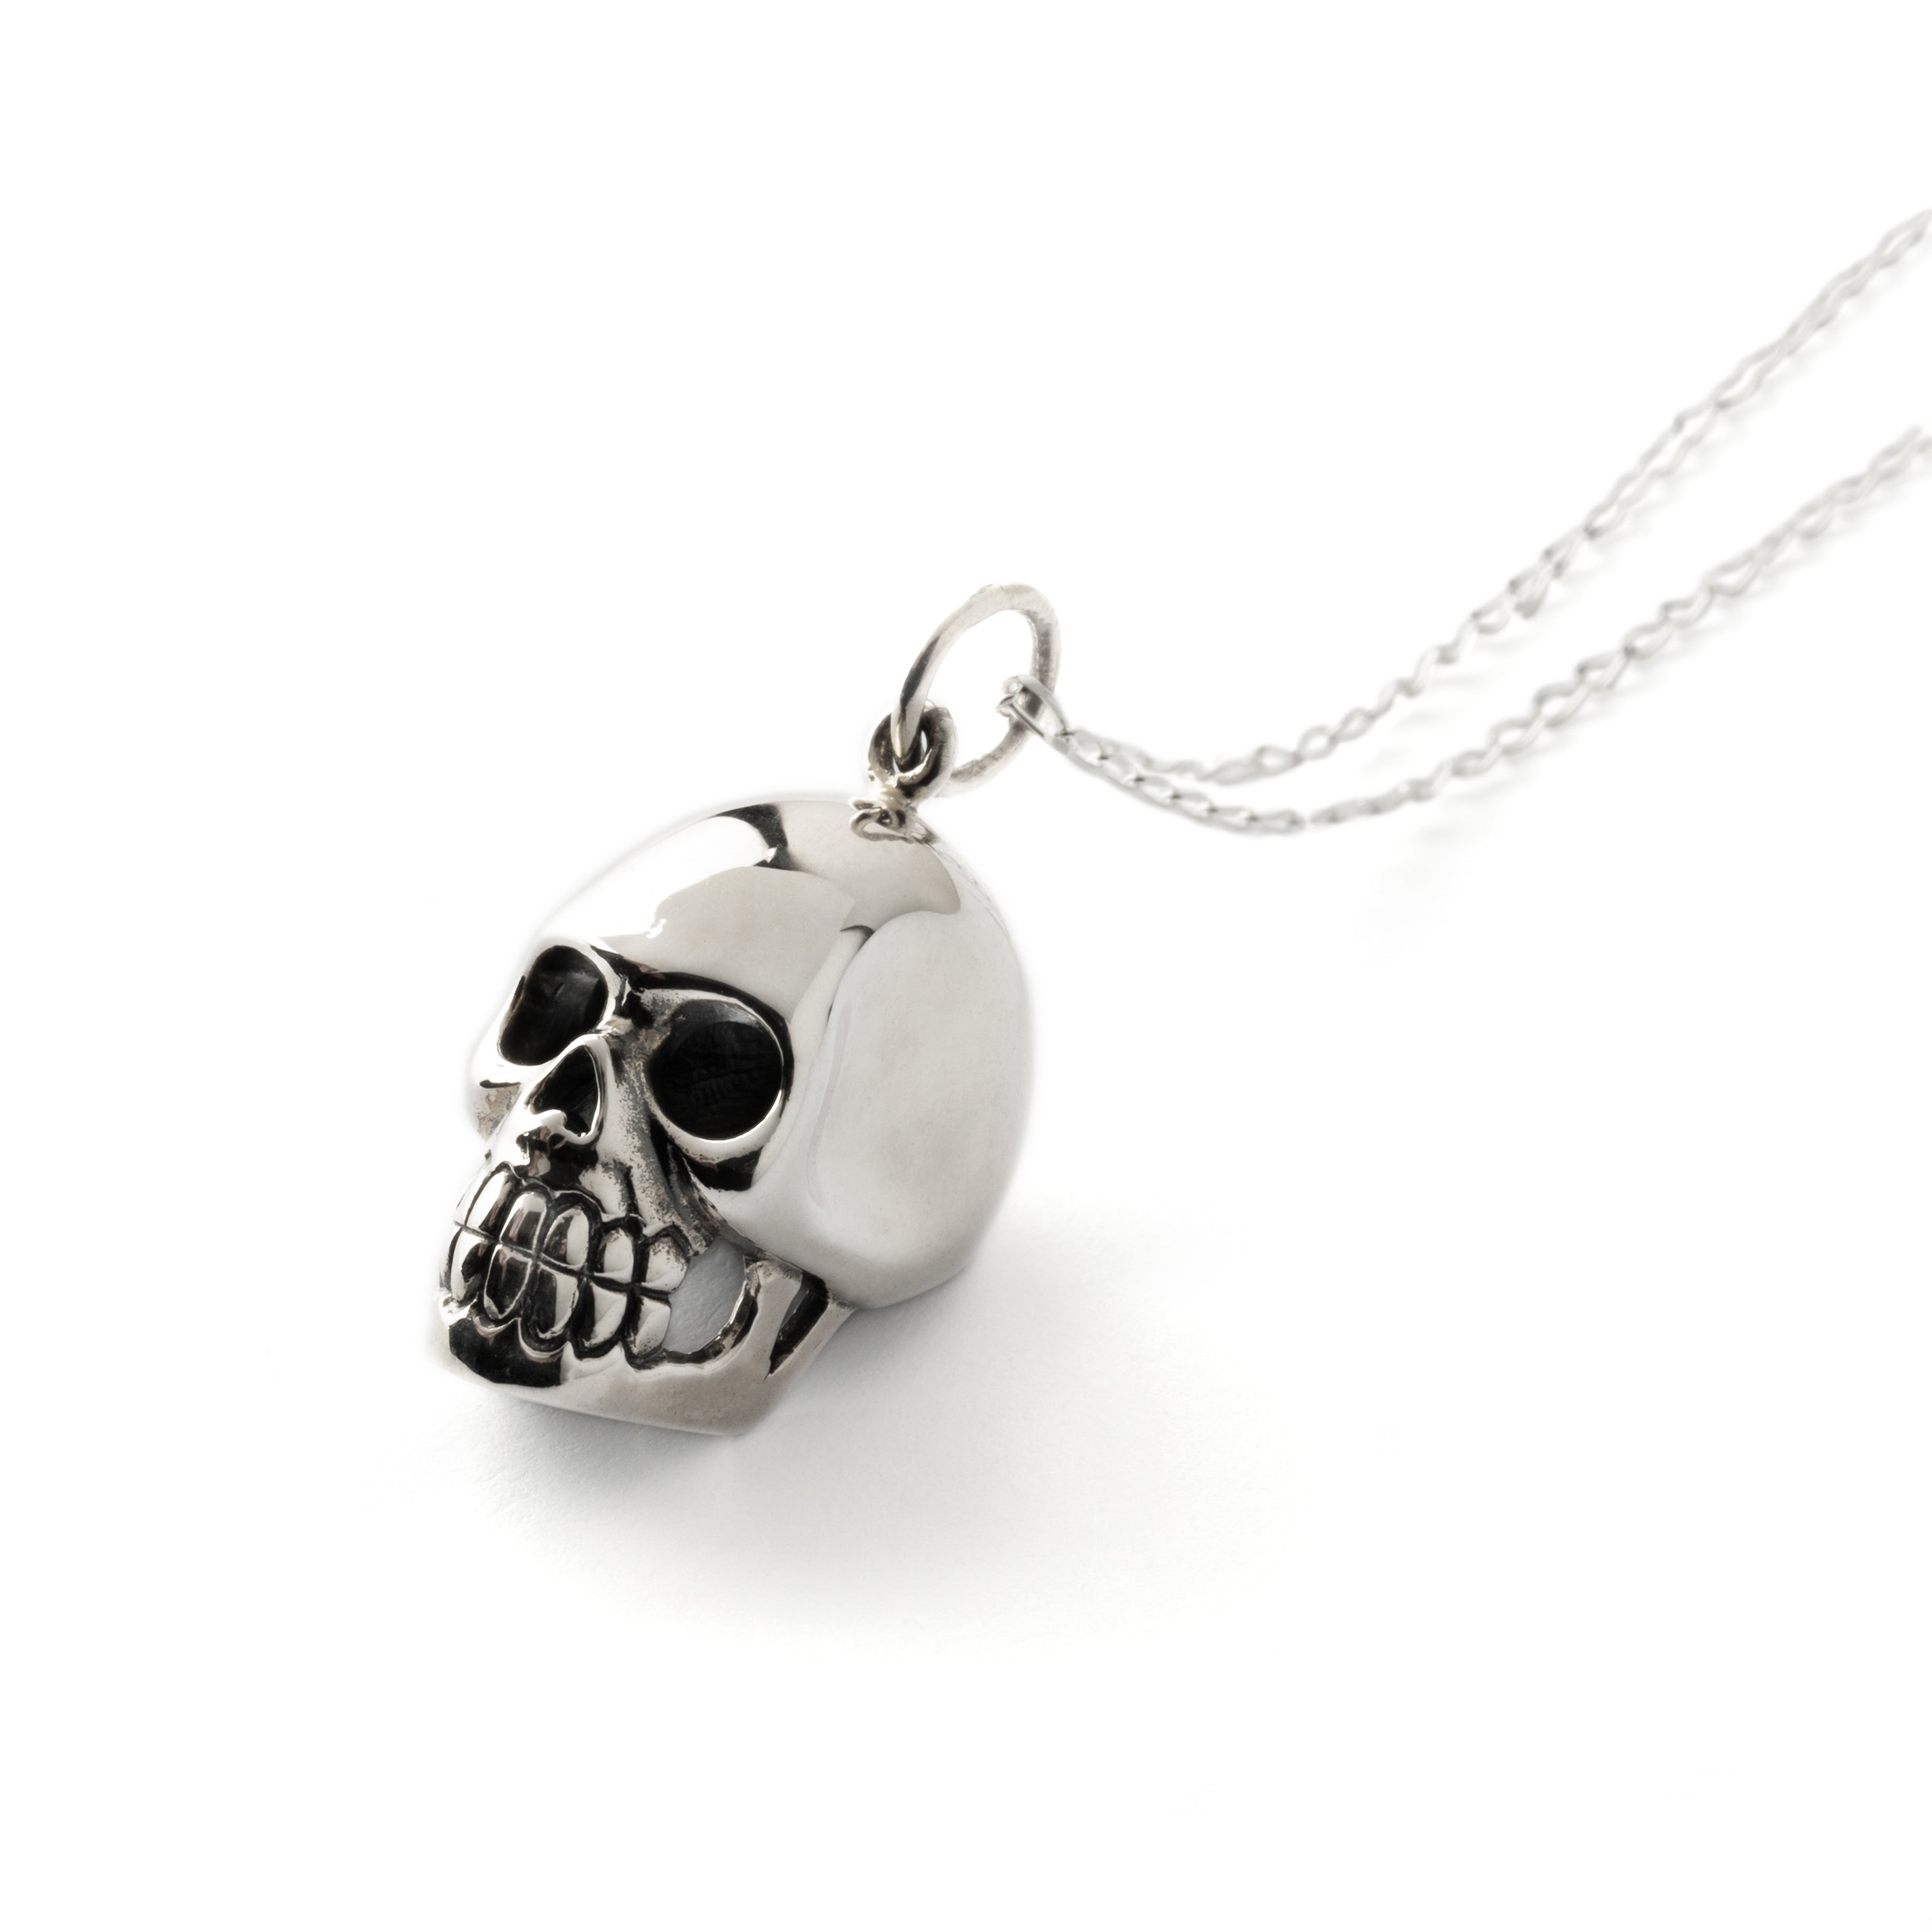 Silver Skull Charm Necklace right side view